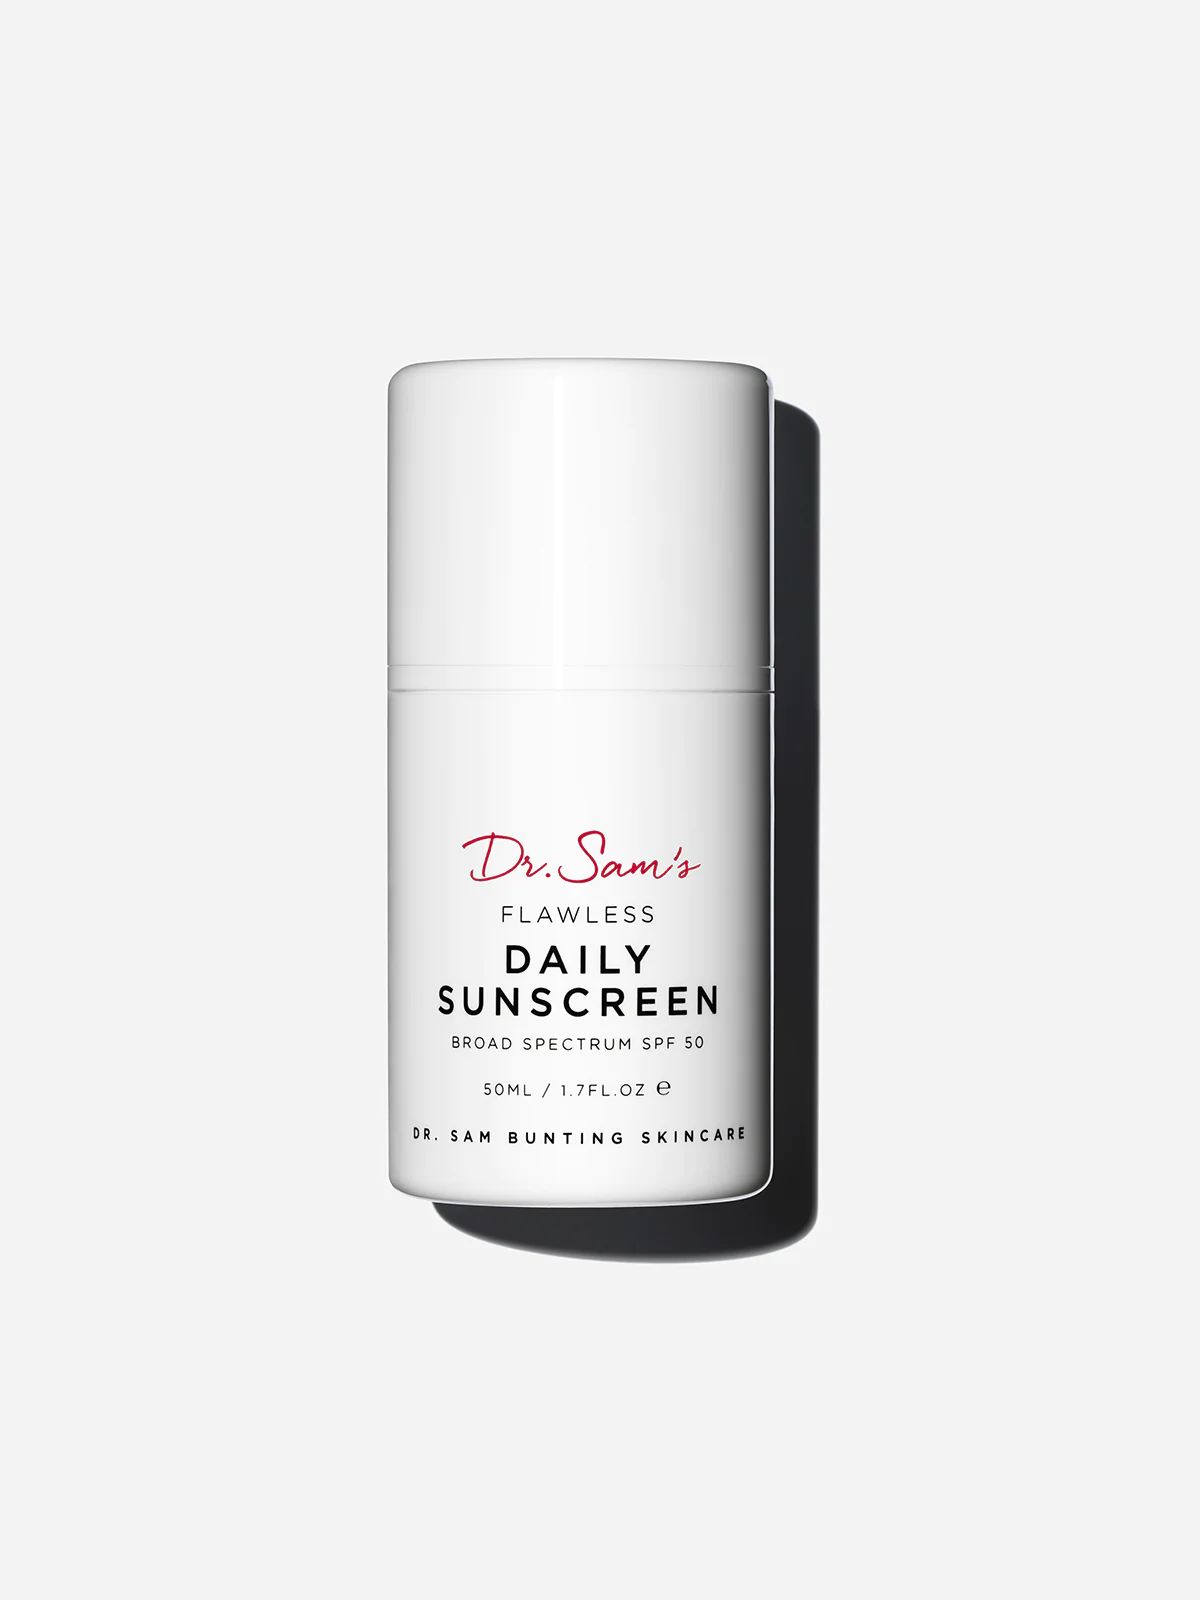 Flawless Daily Sunscreen SPF 50 | Dr Sam's